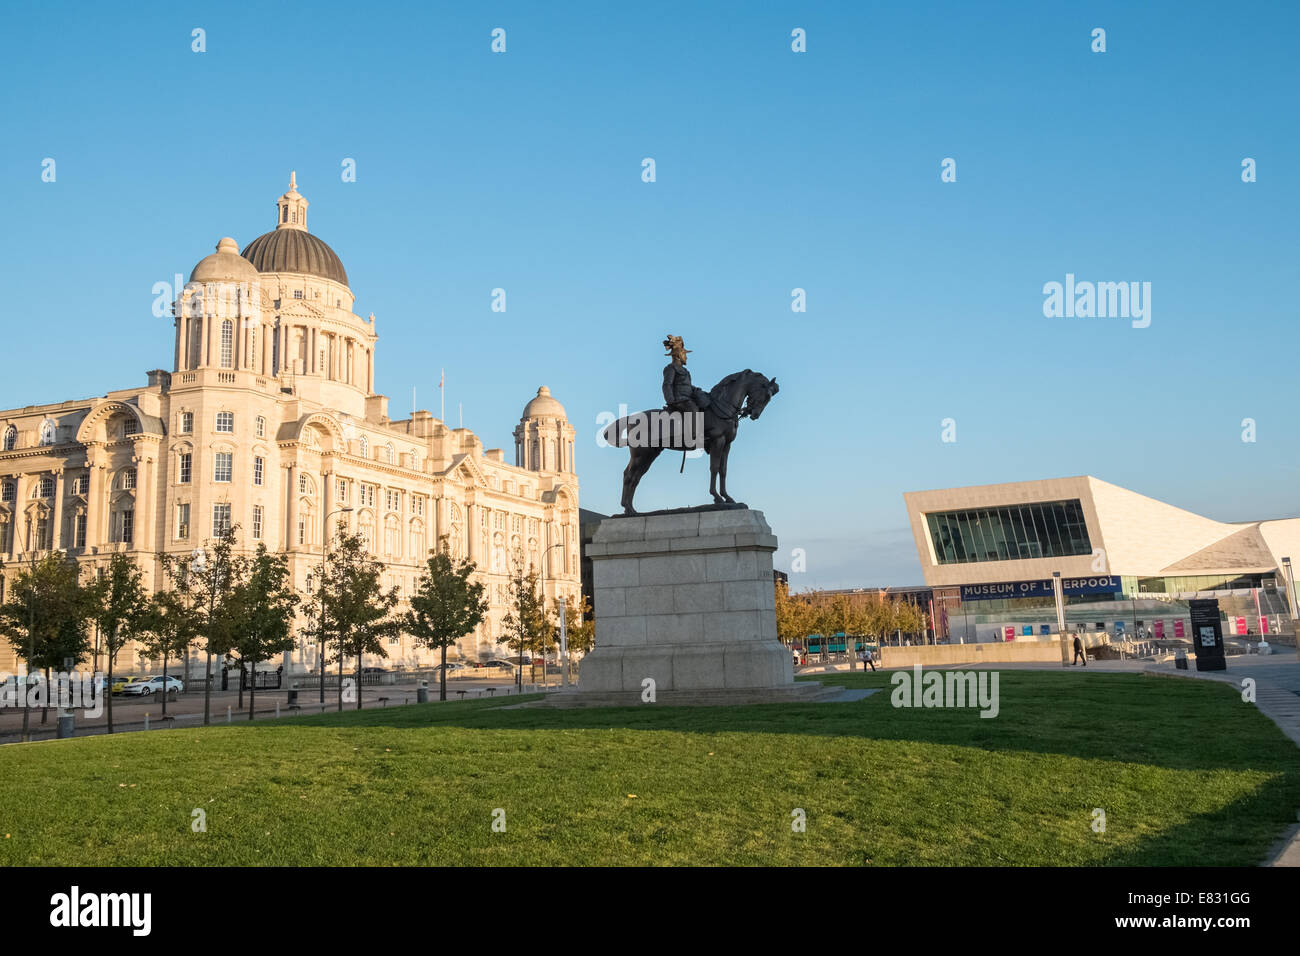 Bronze statue of King Edward 7th near Port of Liverpool and Museum of Liverpool buildings, Pier Head, Liverpool, Merseyside UK Stock Photo